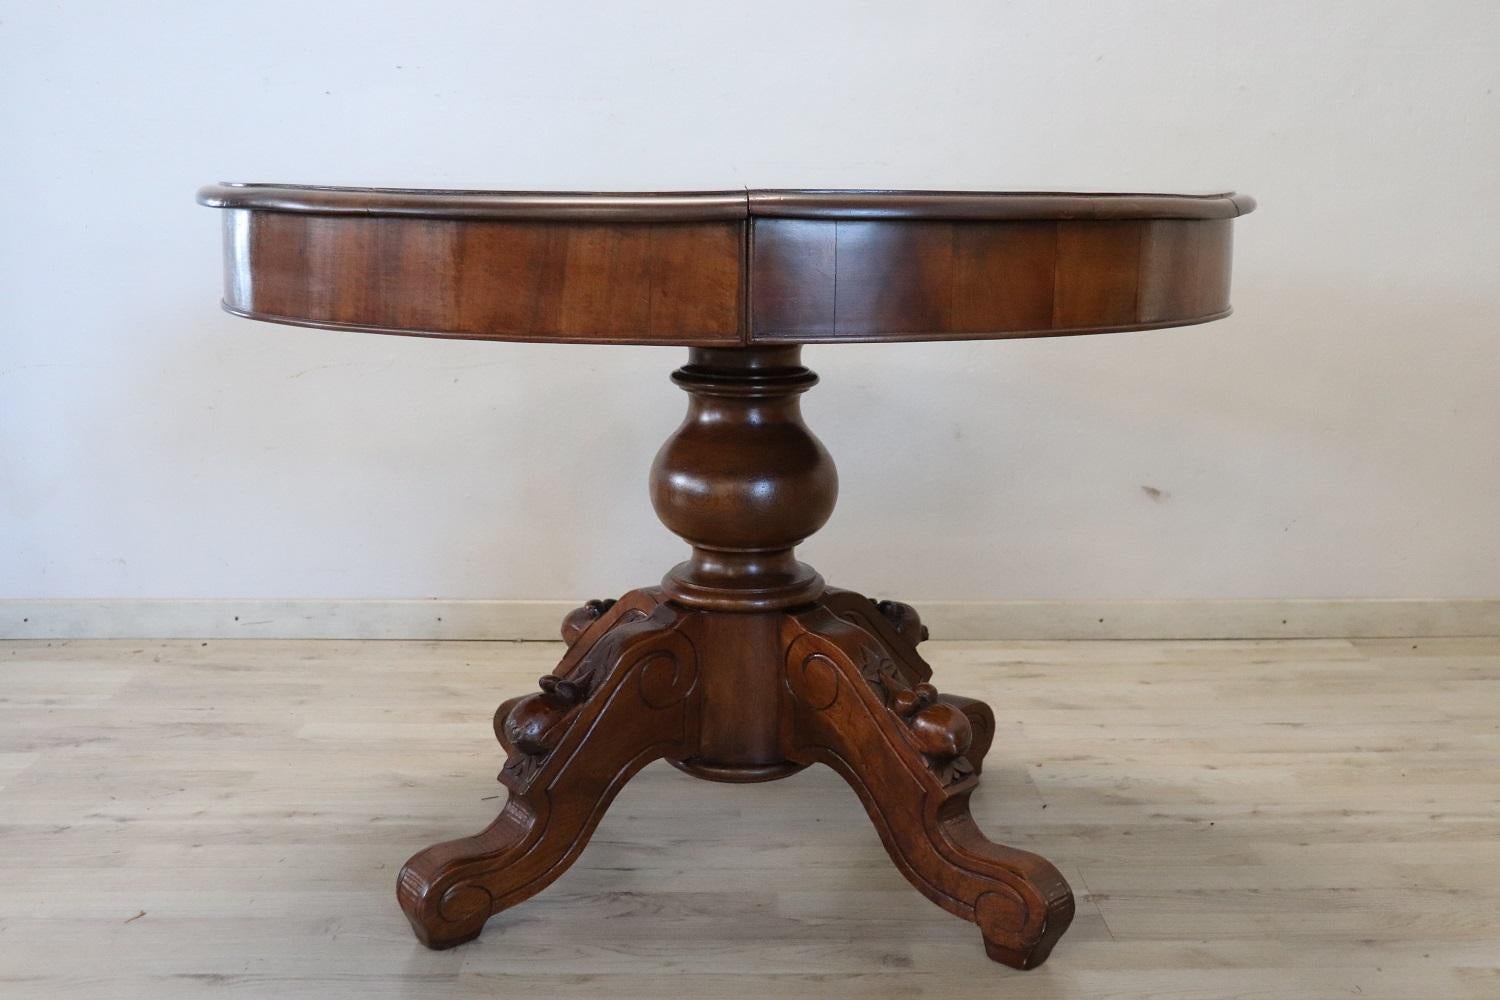 Beautiful important antique oval dining room table, 1840 in solid walnut wood. This table is perfect for a dining room, it extends into the center becoming a large table that can accommodate many people. The large central leg is finely turned and